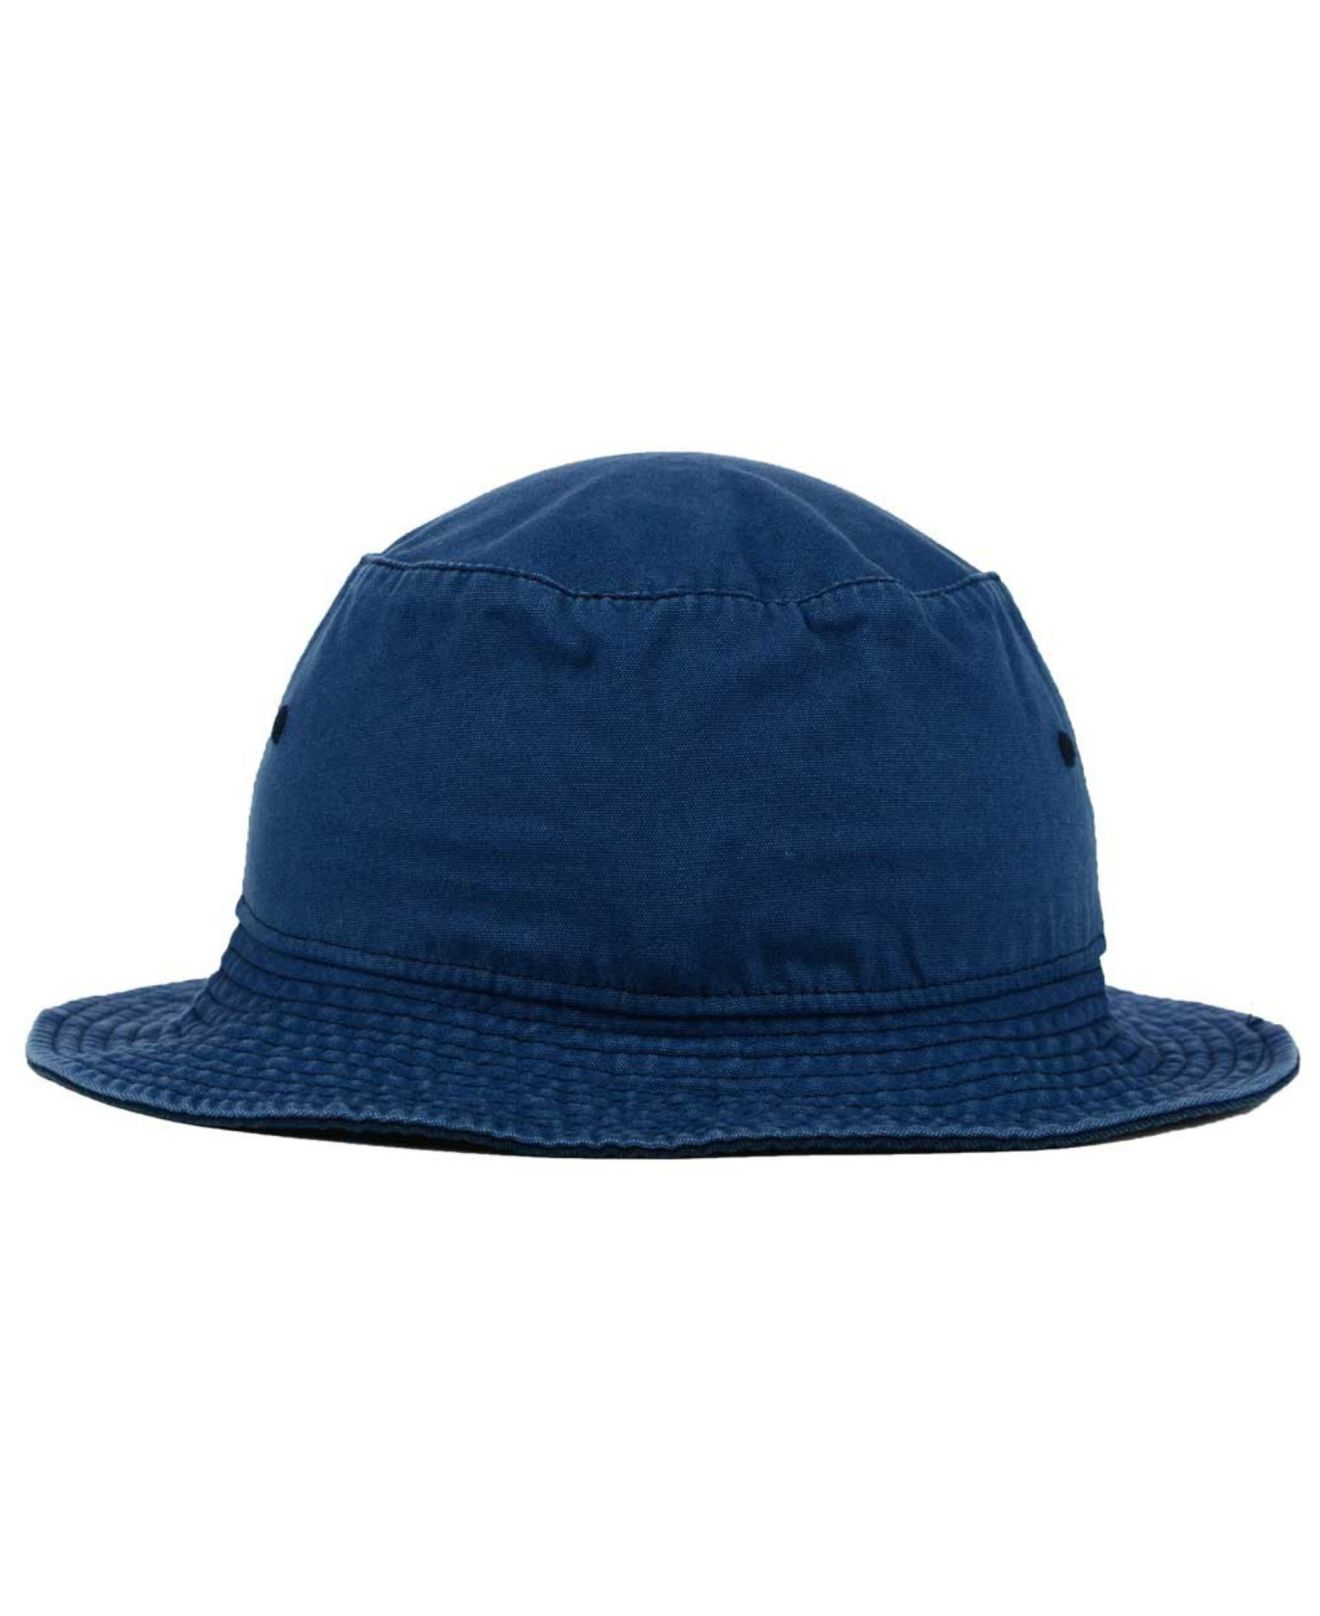 Lyst - 47 Brand Tampa Bay Rays Fever Dog Bucket Hat in Blue